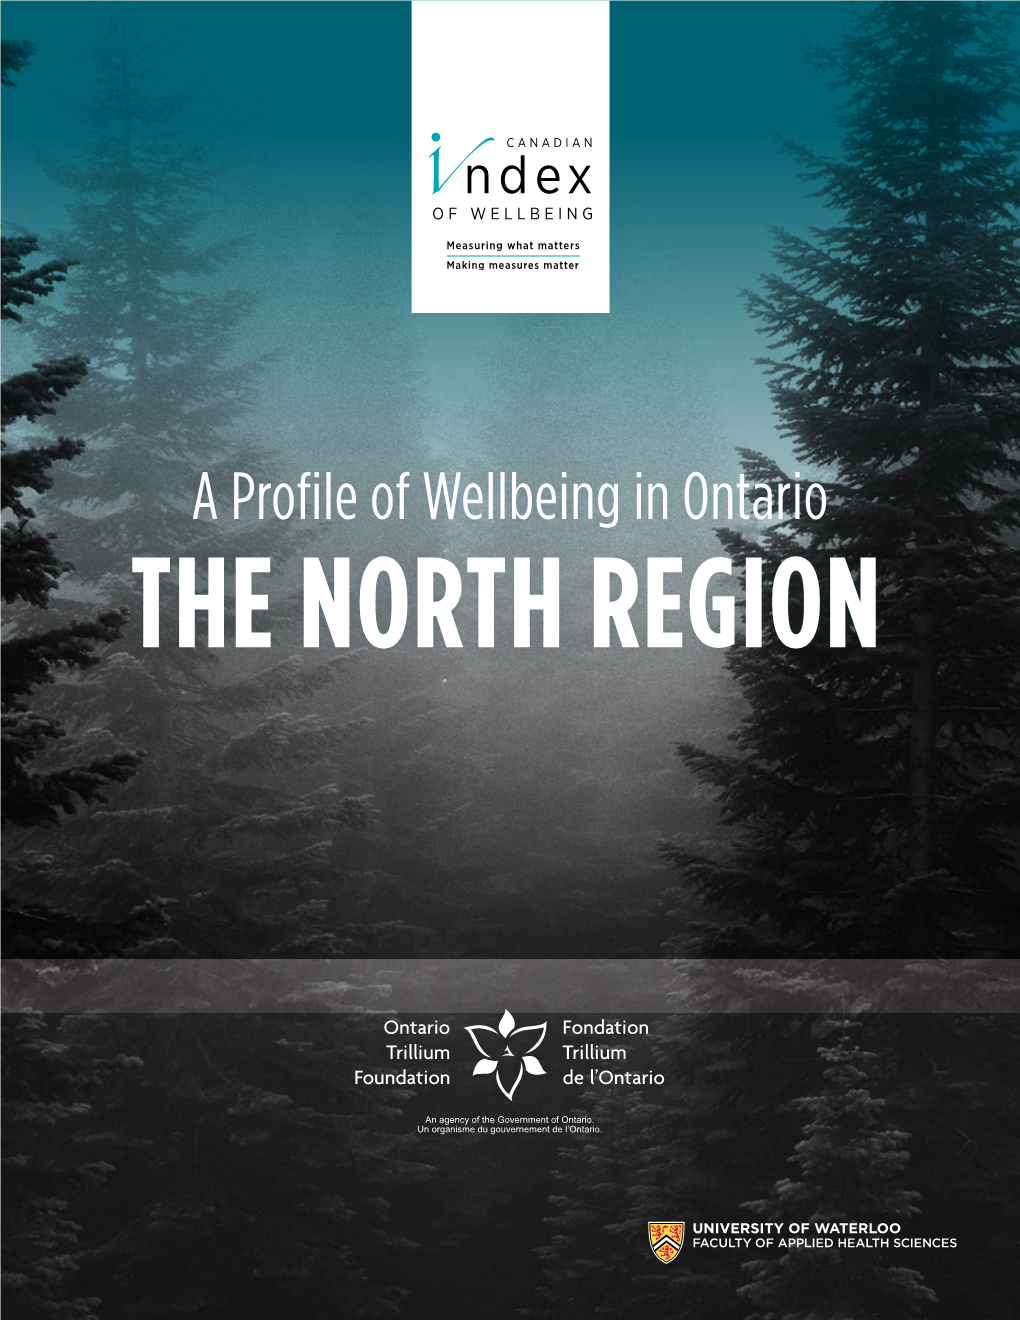 A Profile of Wellbeing in Ontario: the North Region (PDF)